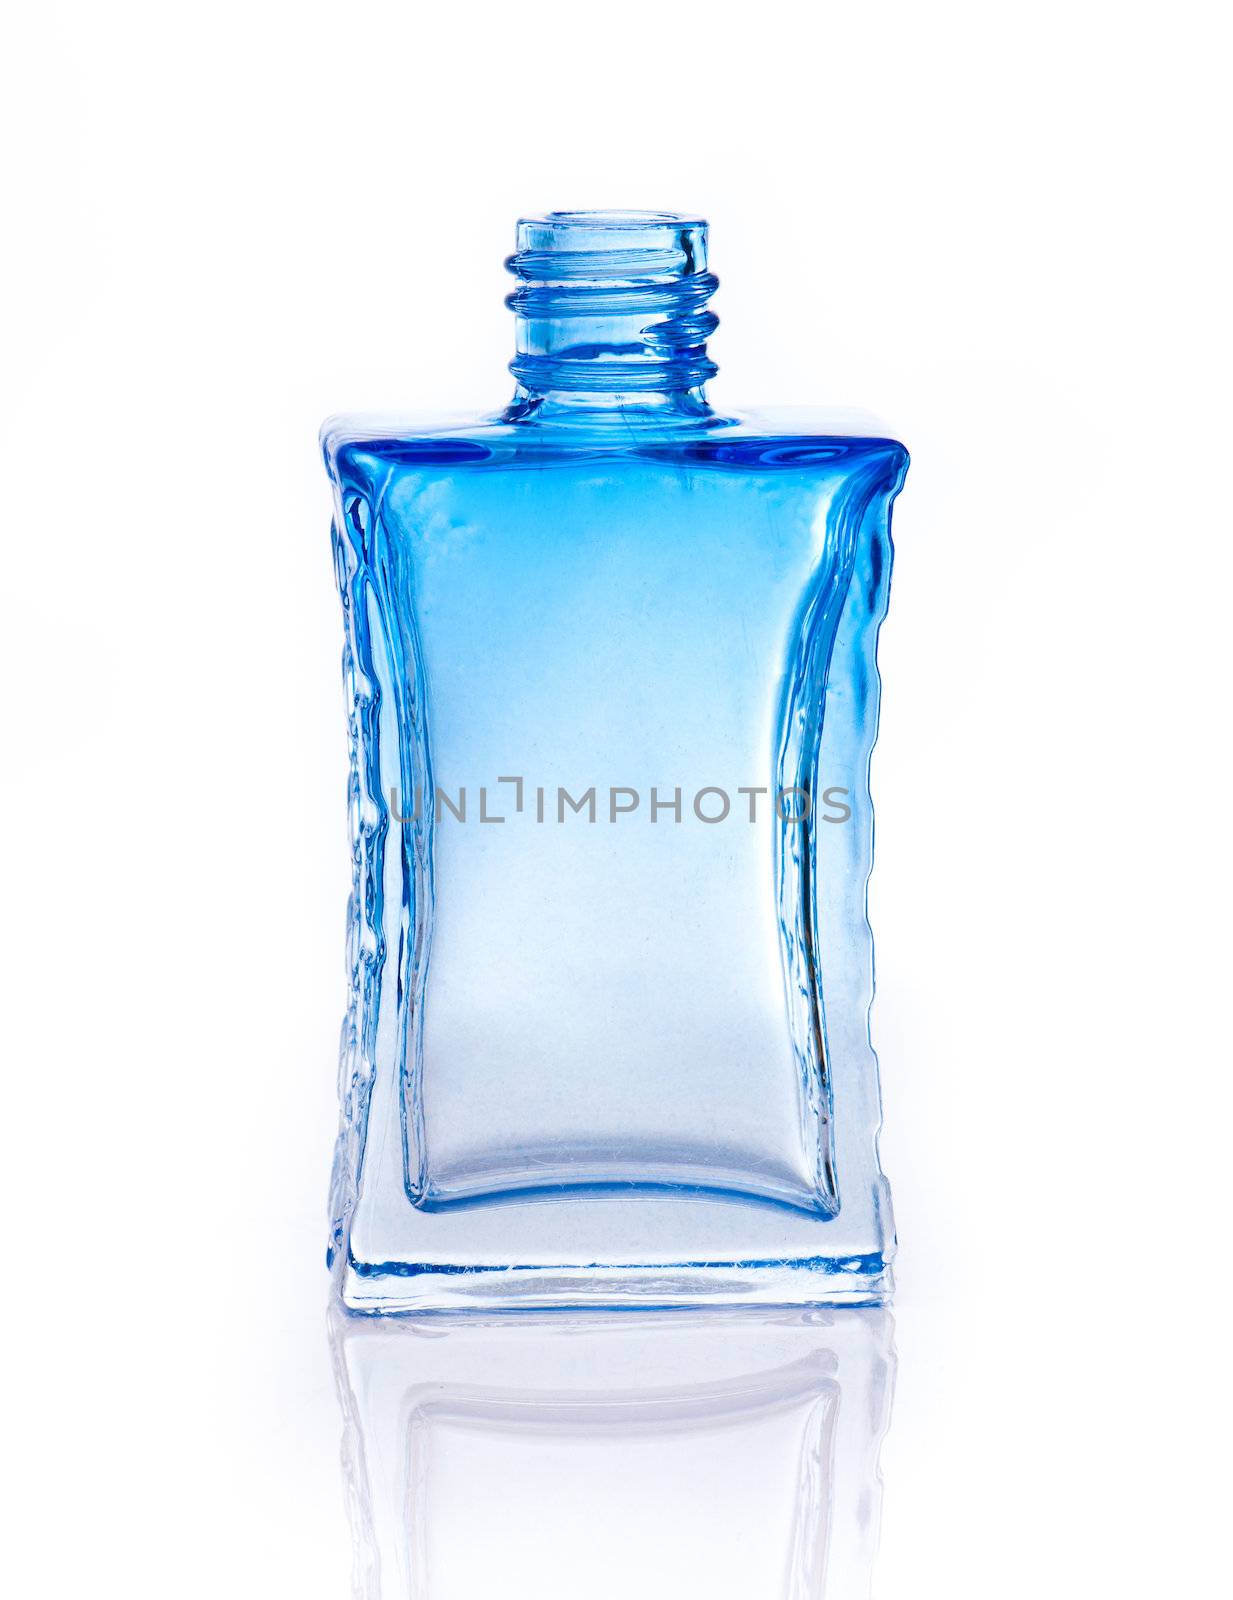 empty glass perfume bottle on a white backgroung